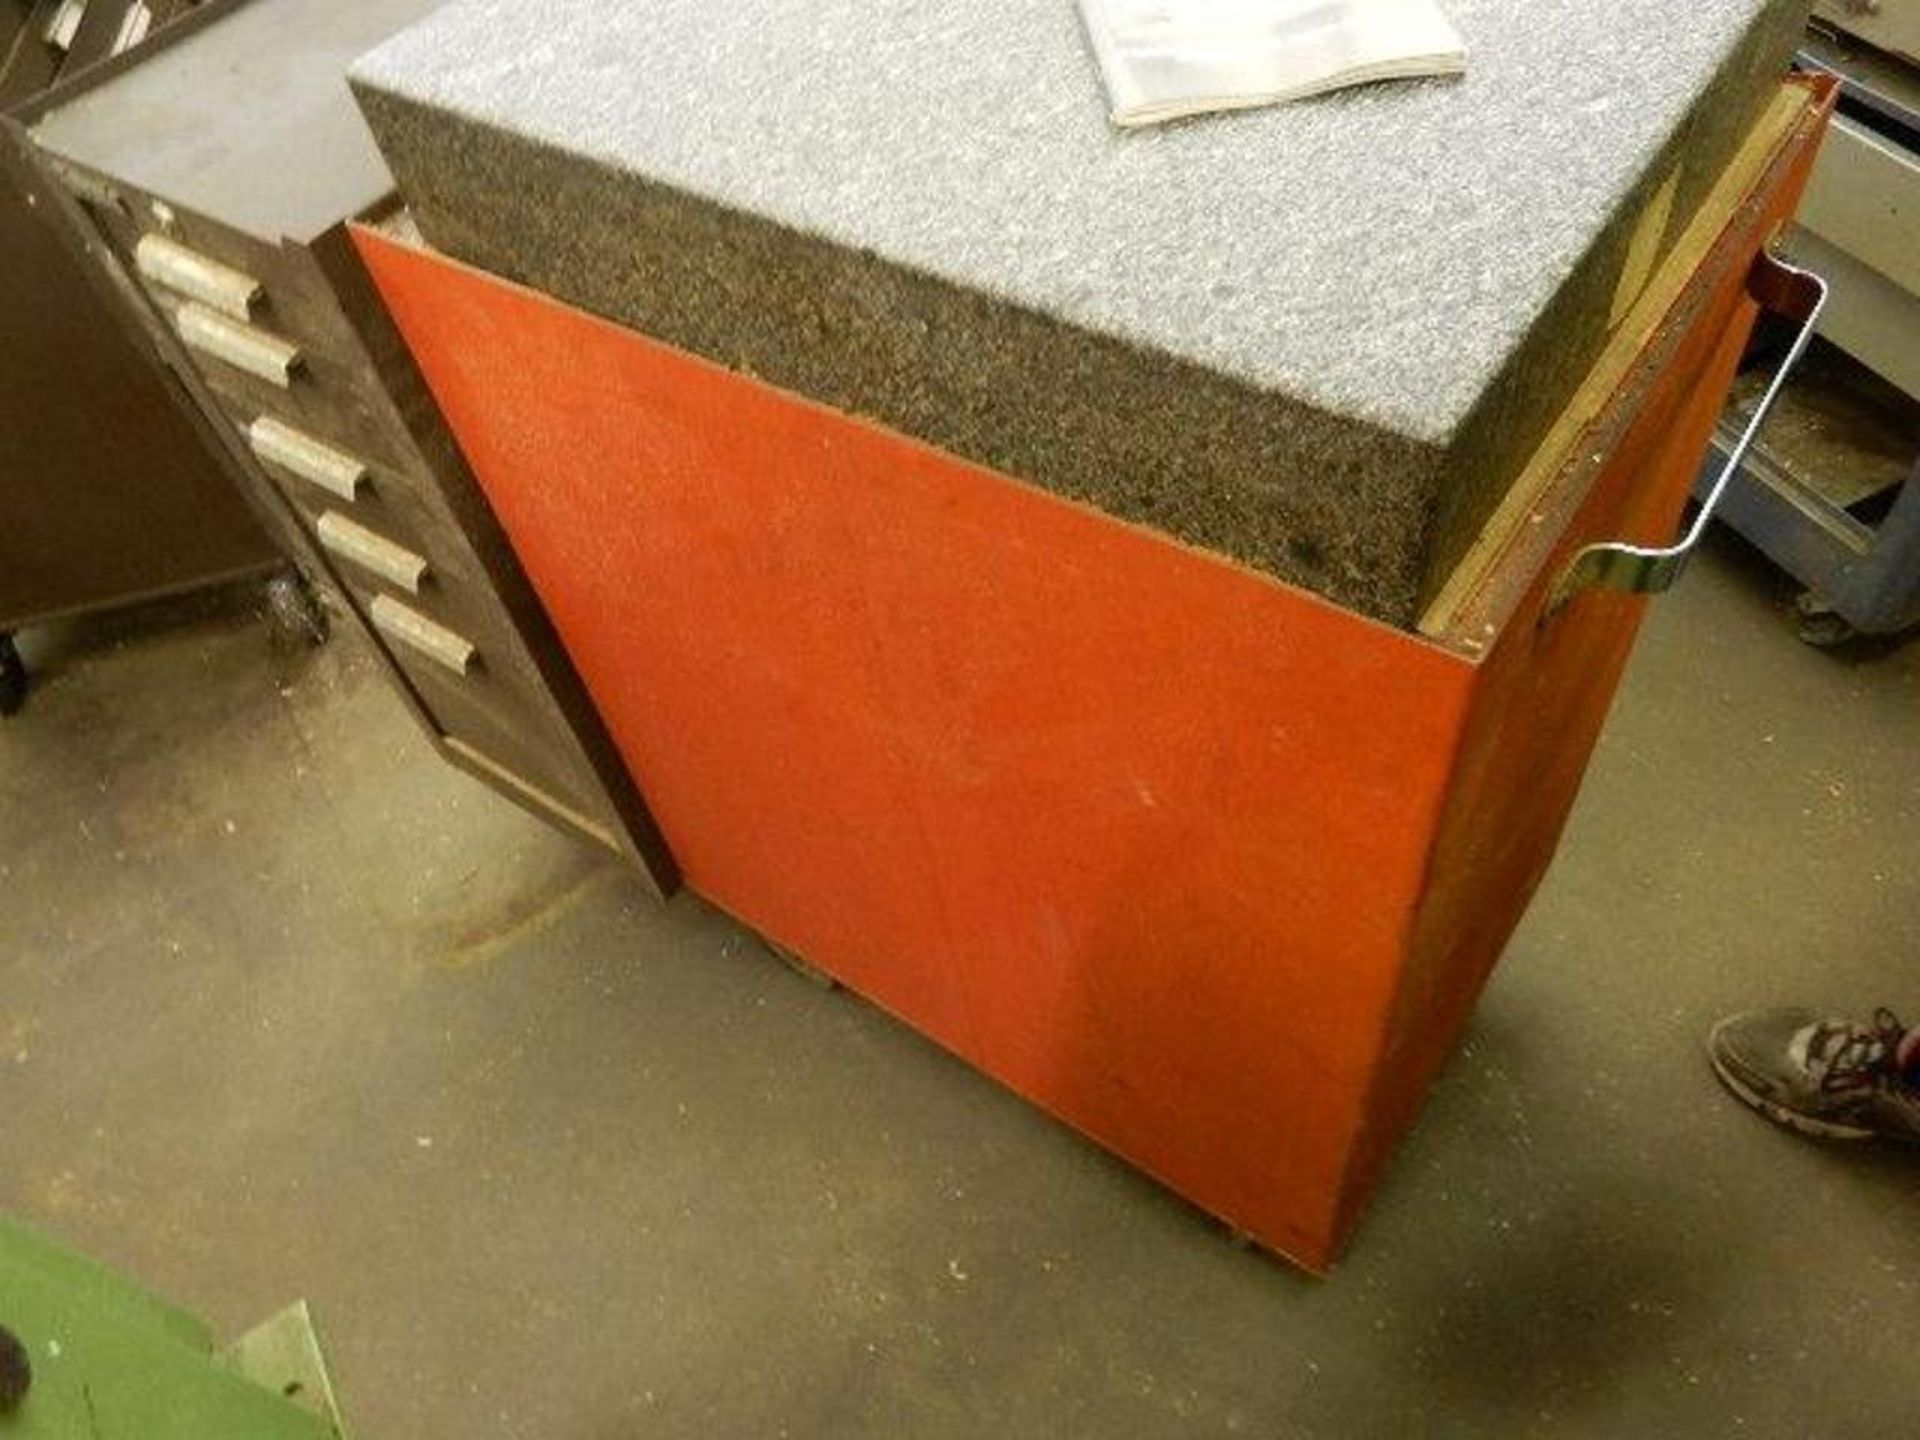 Kennedy Tool Box, with 18" x 24" x 4" Granite Surface Plate - Image 4 of 6